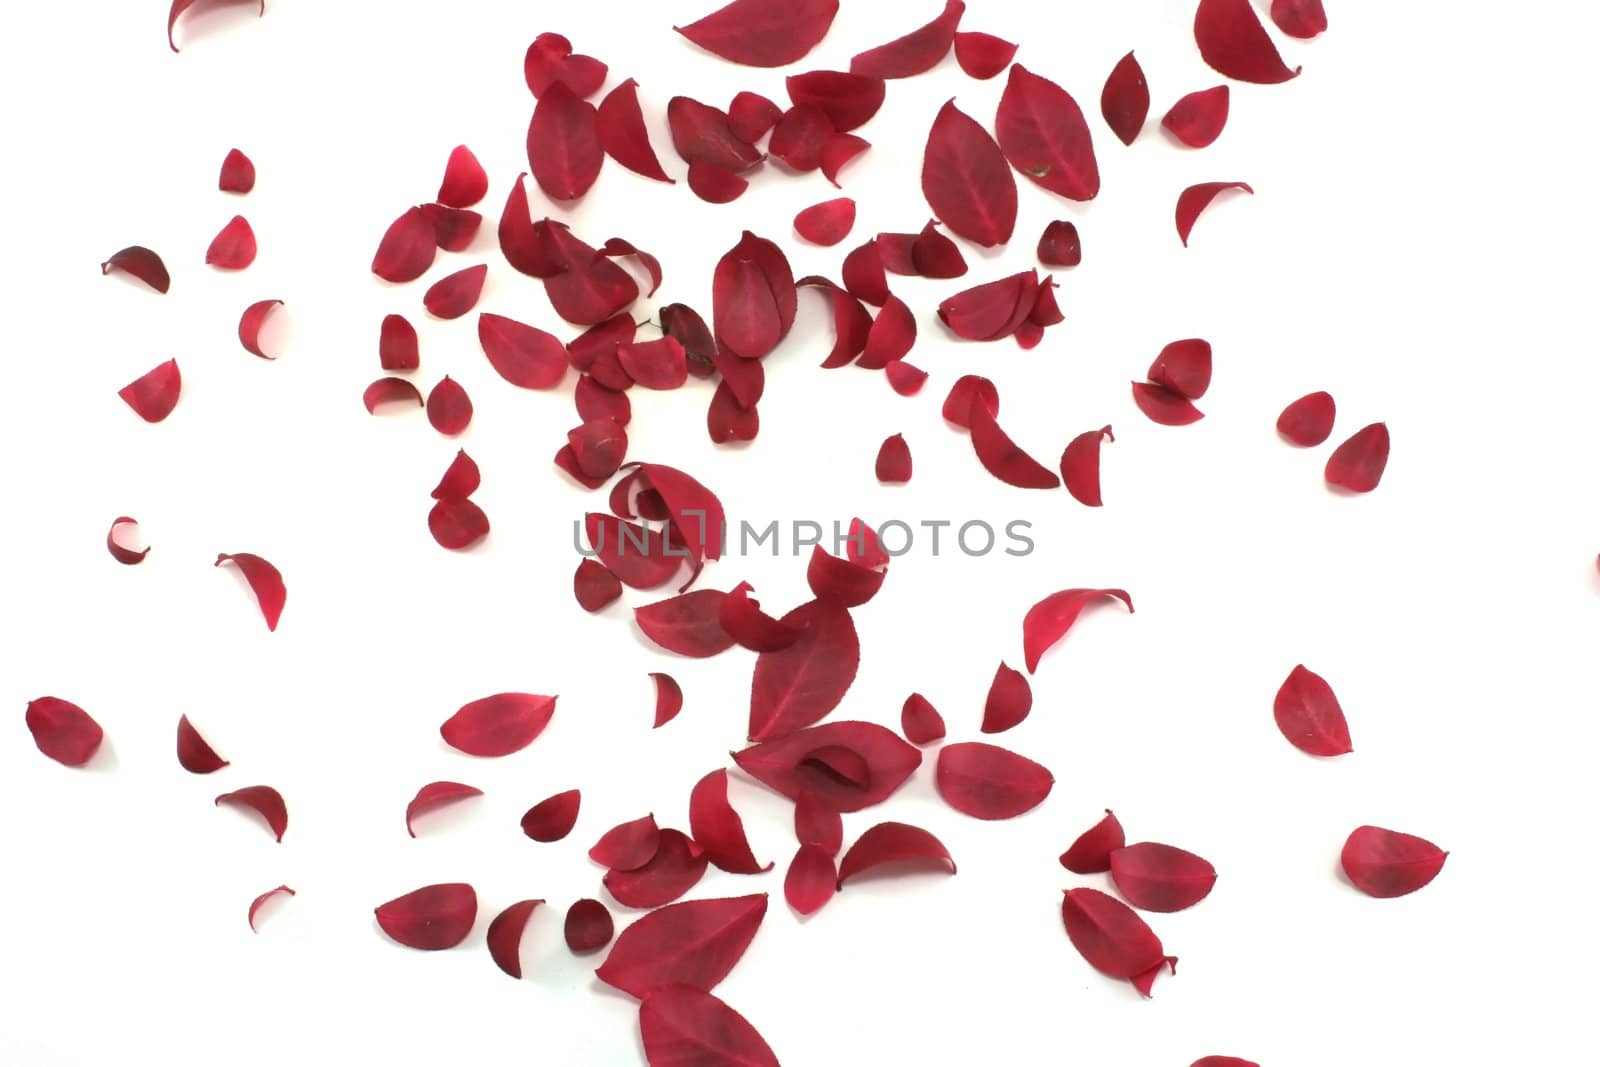 Red leaves randomly scattered on a white background